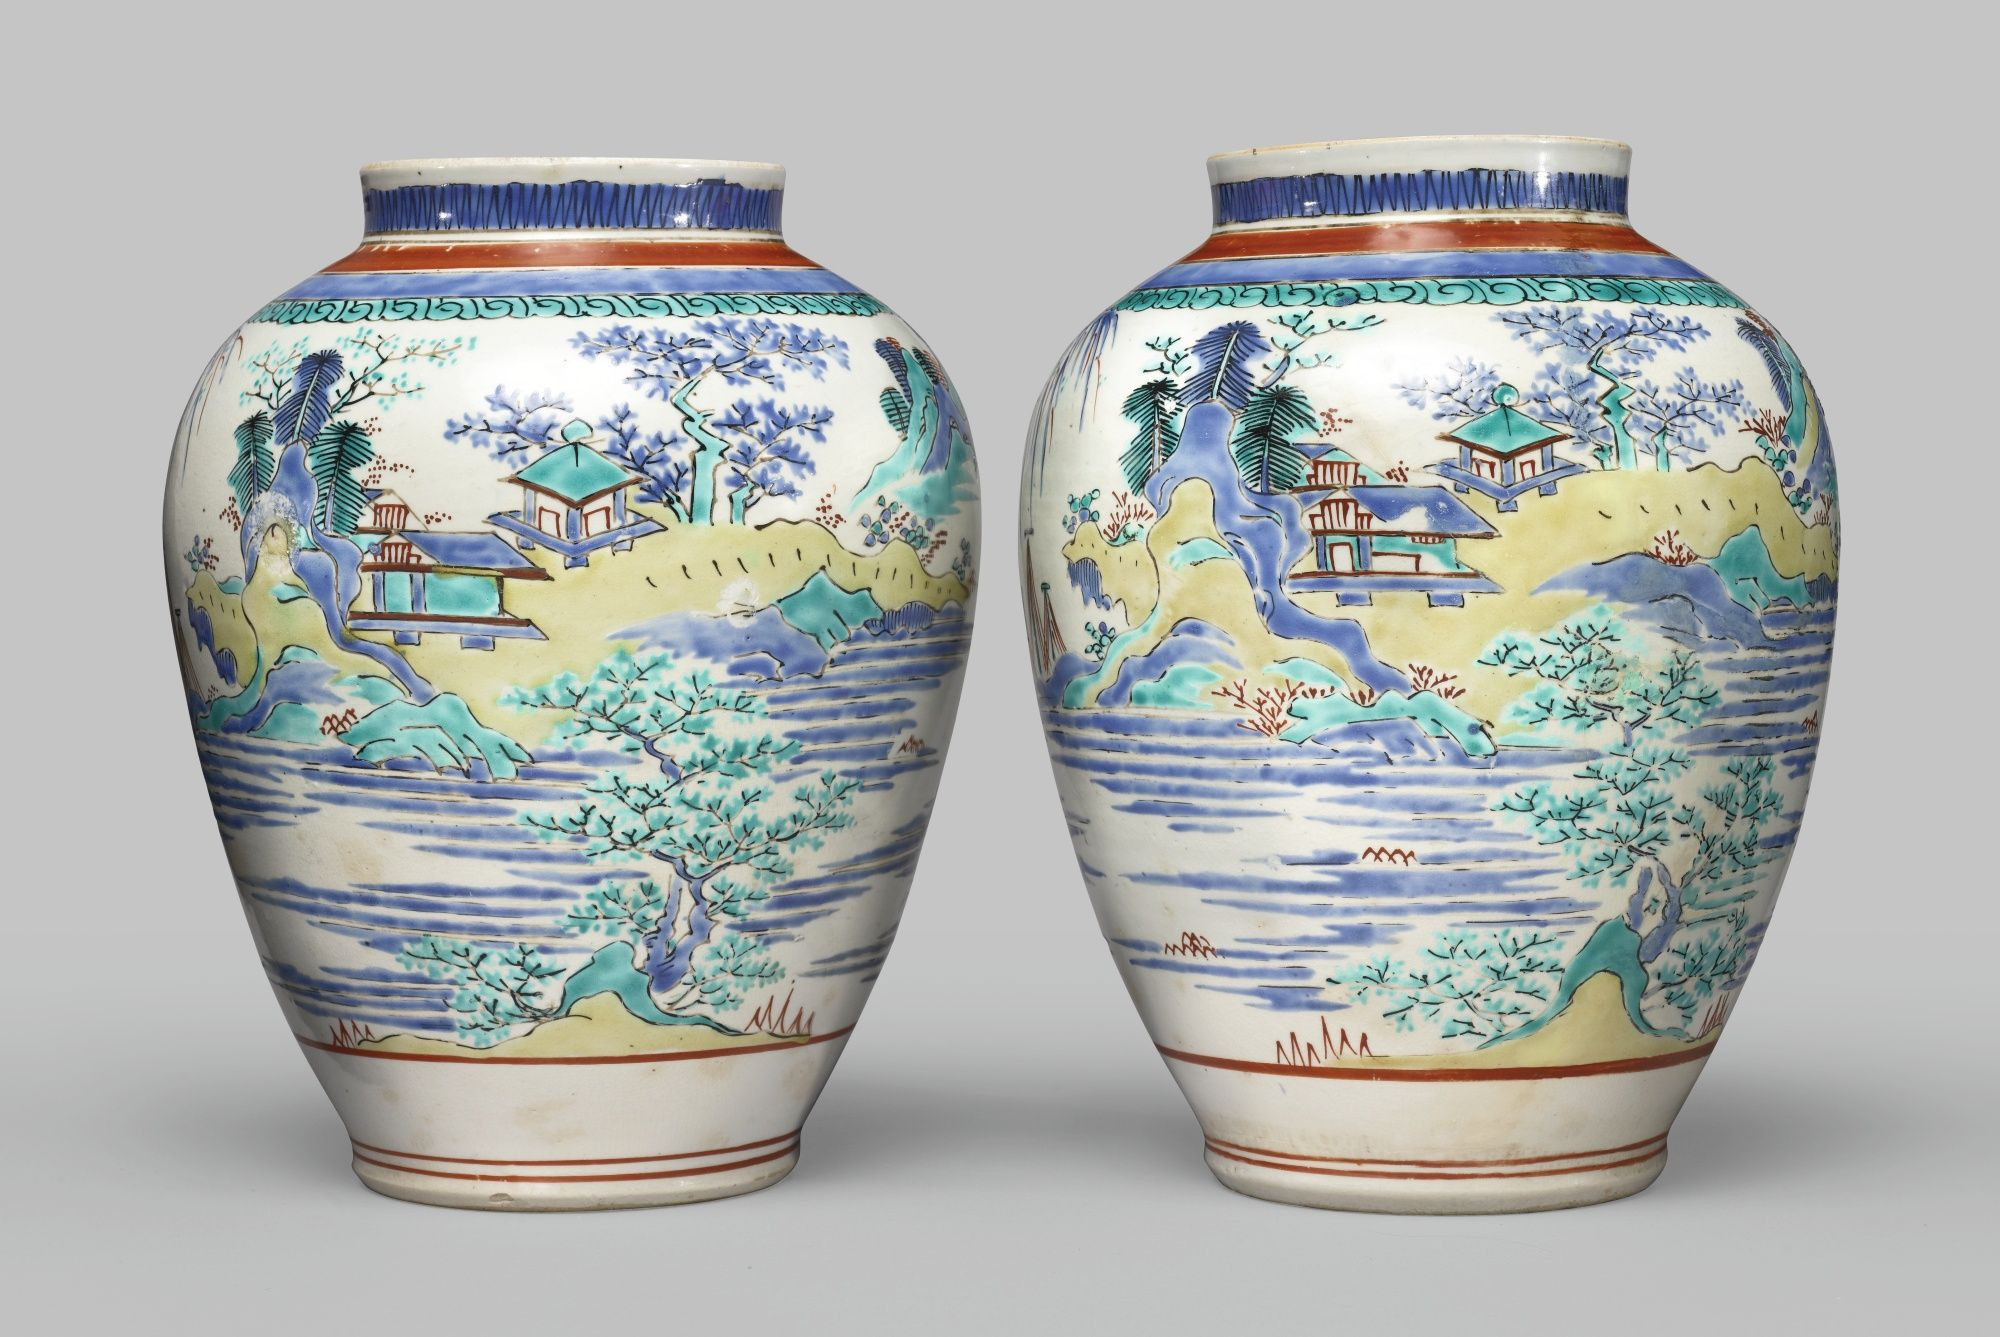 12 Great Large Yellow Ceramic Vase 2024 free download large yellow ceramic vase of a pair of large kakiemon vases japan late 17th century each of throughout a pair of large kakiemon vases japan late 17th century each of ovoid form decorated in 